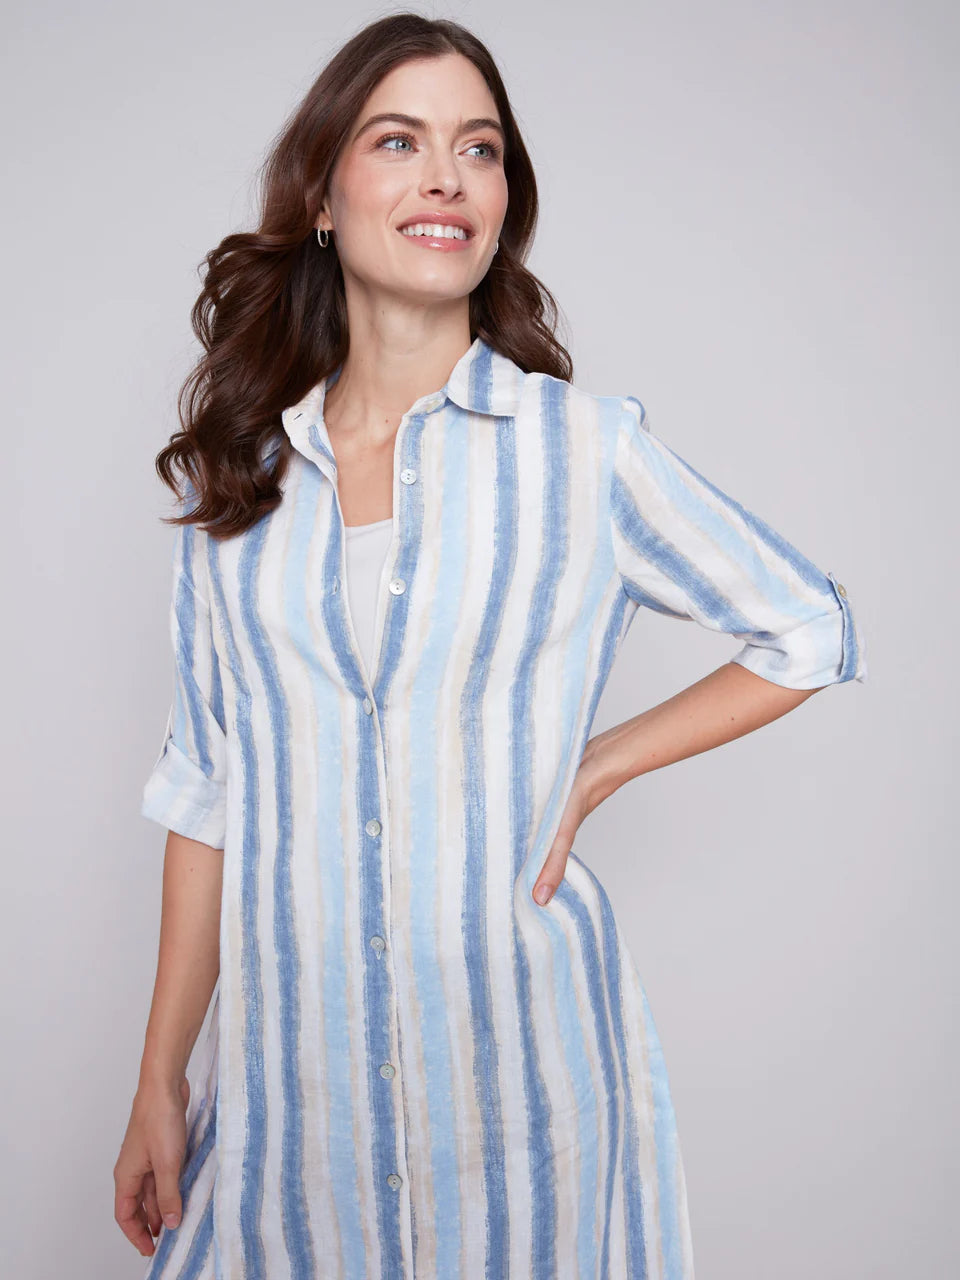 Nautical Striped Duster Dress